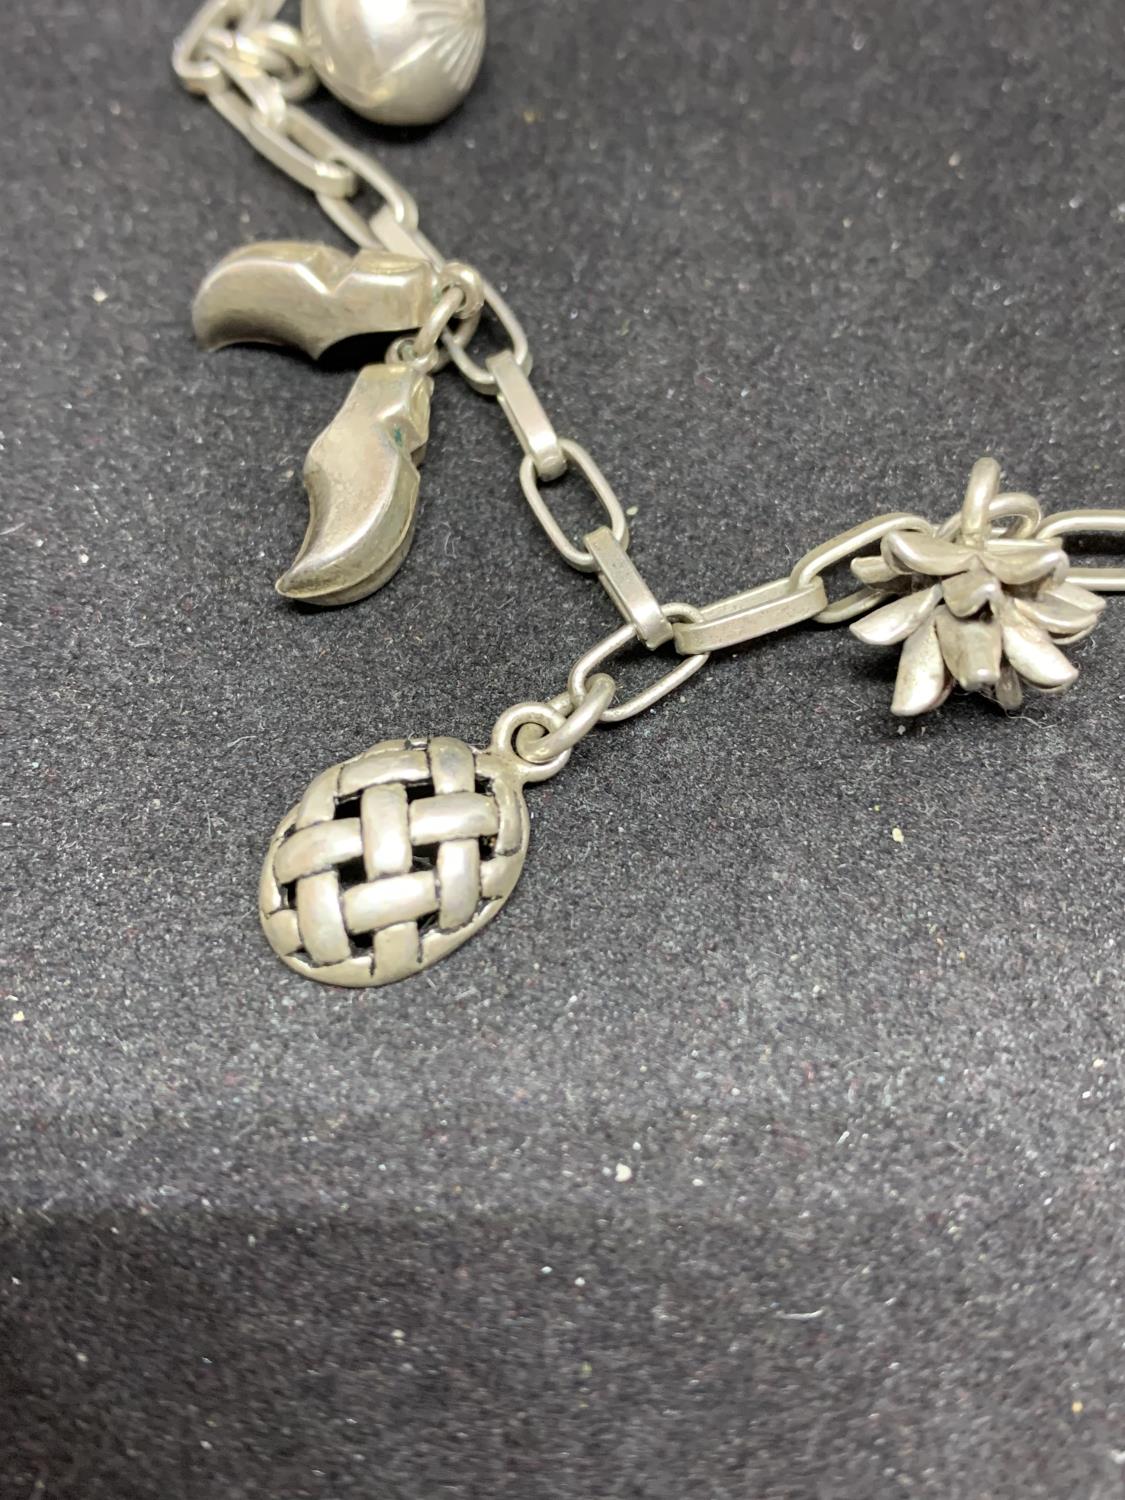 A SILVER CHARM BRACELET WITH NINE CHARMS TO INCLUDE CLOGS, FEATHERS, TURTLE, FISH, SHELL ETC - Image 2 of 4